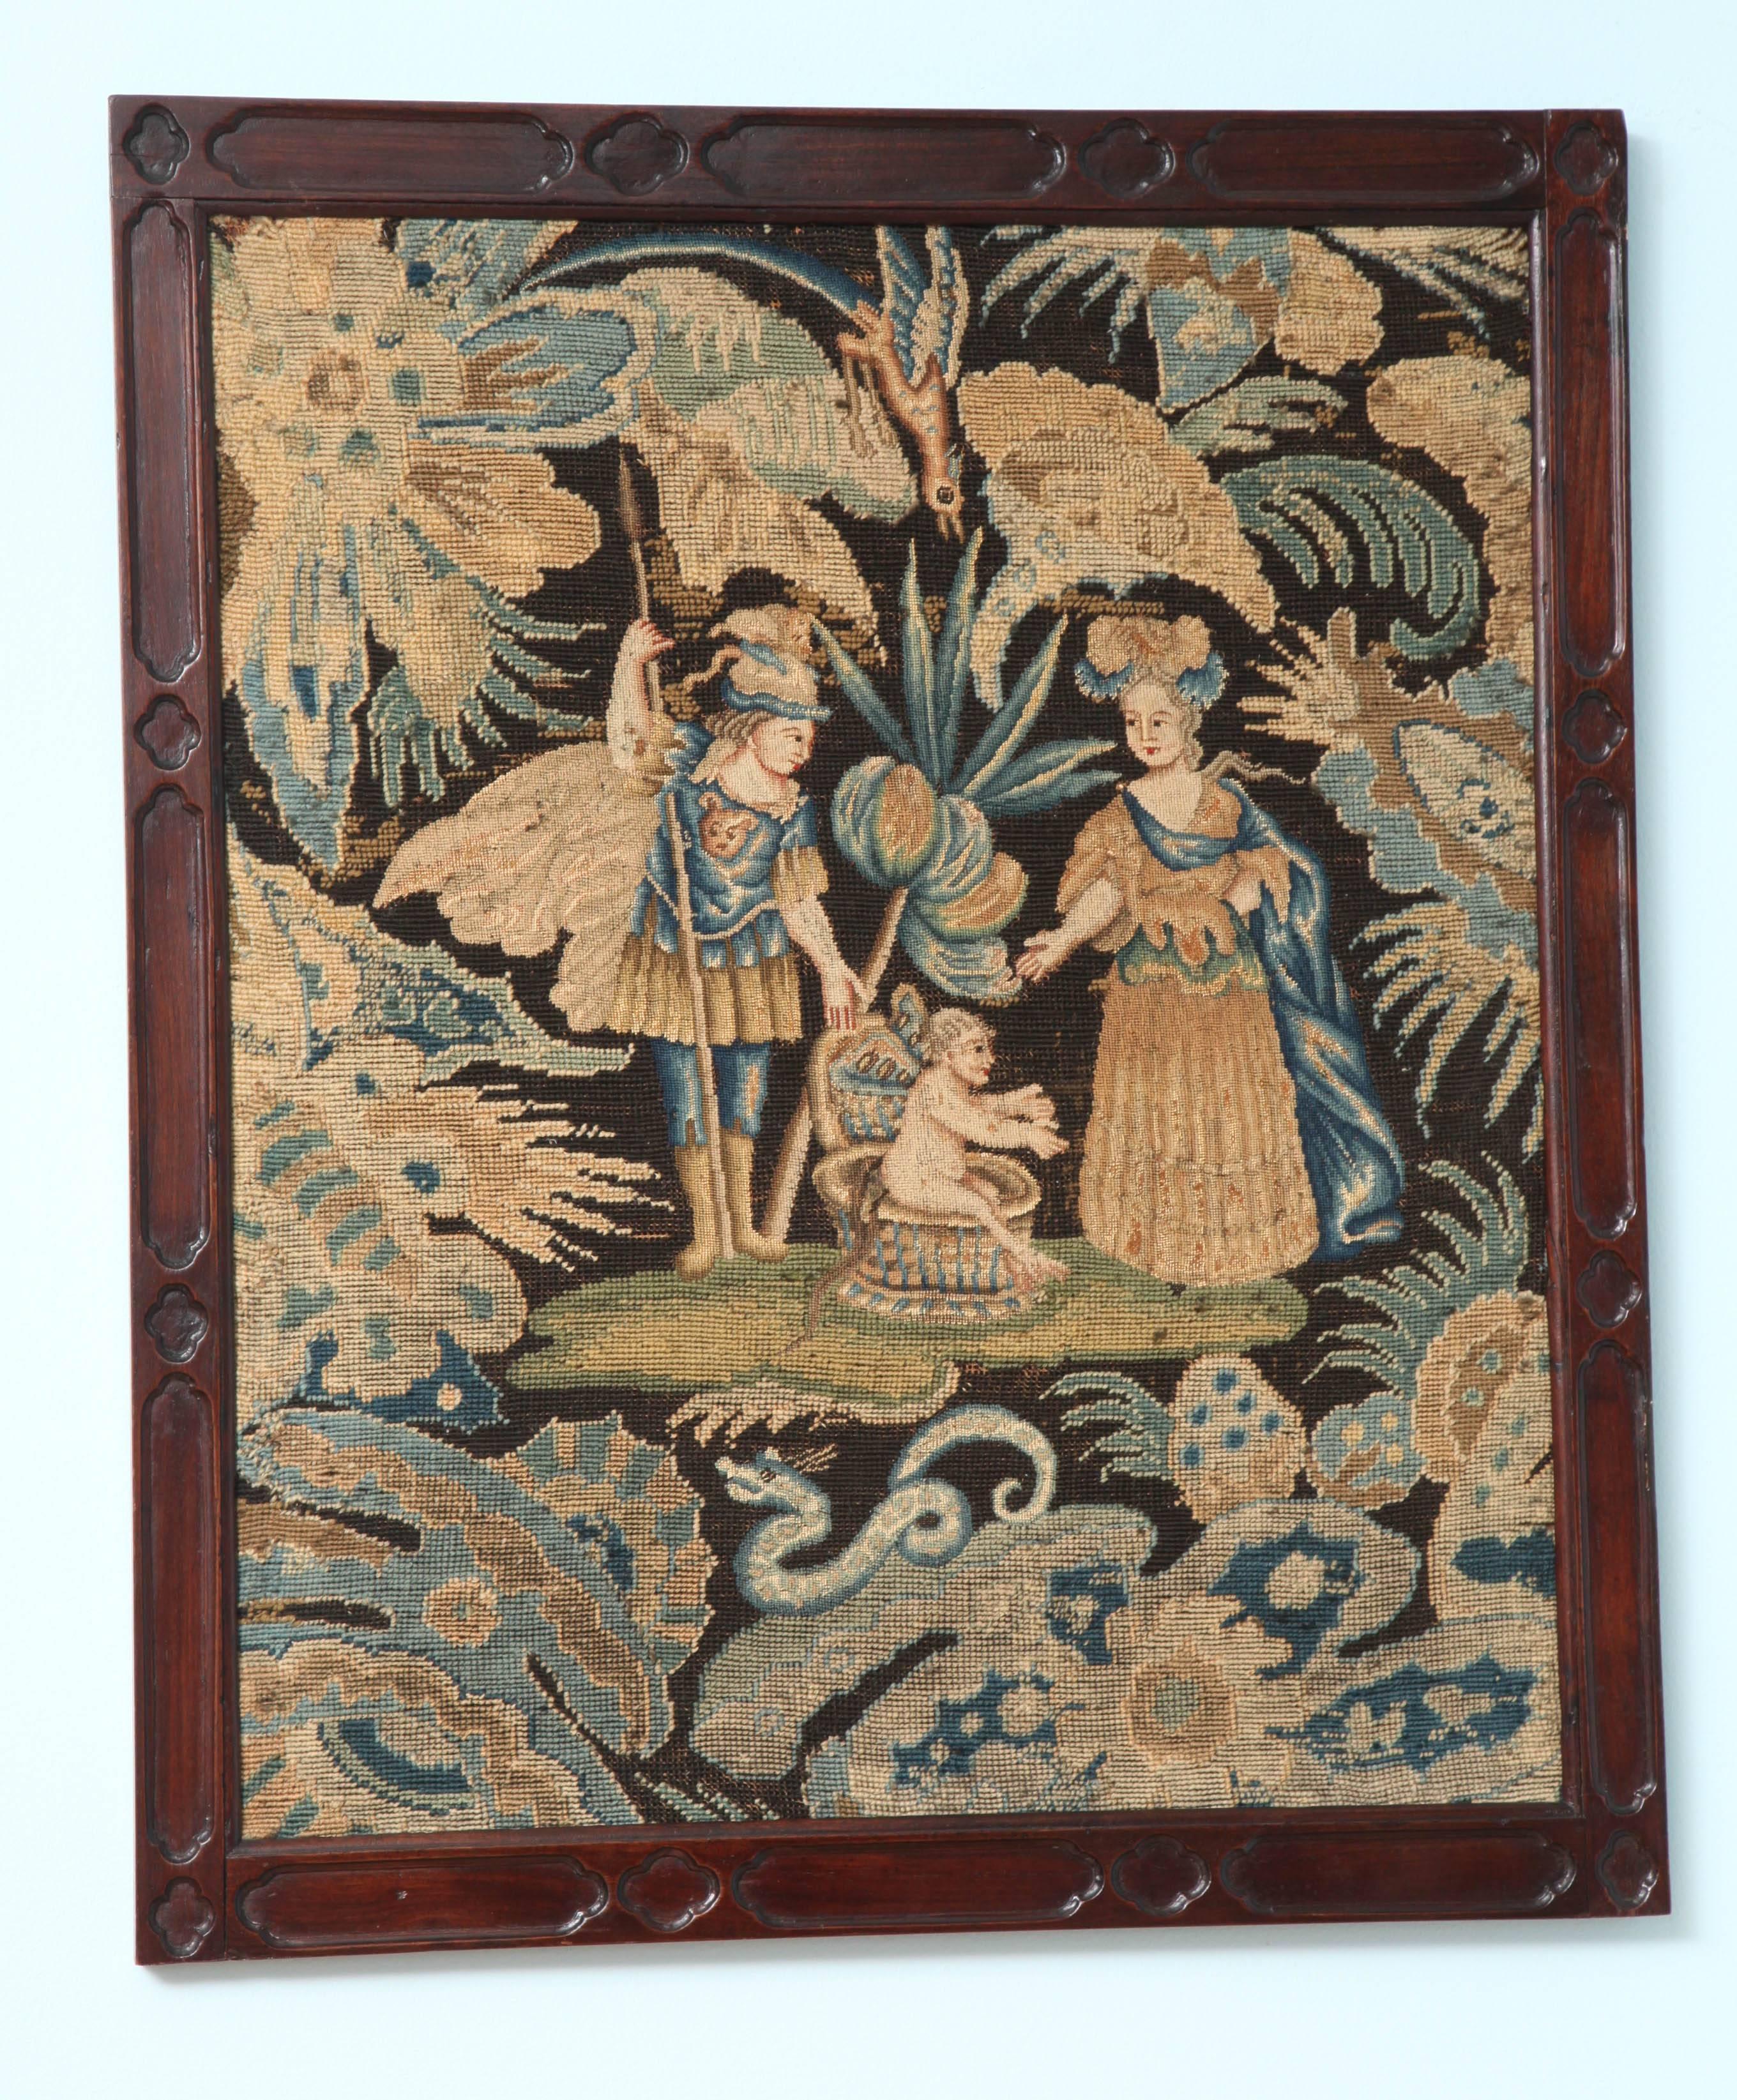 A pair of George II needlework panels within hand-carved mahogany frames; the panel on the left with Chinese figures, the woman with a small bird perched atop her hand; a leaping spotted dog amidst foliage and a bird on top; the panel on the right